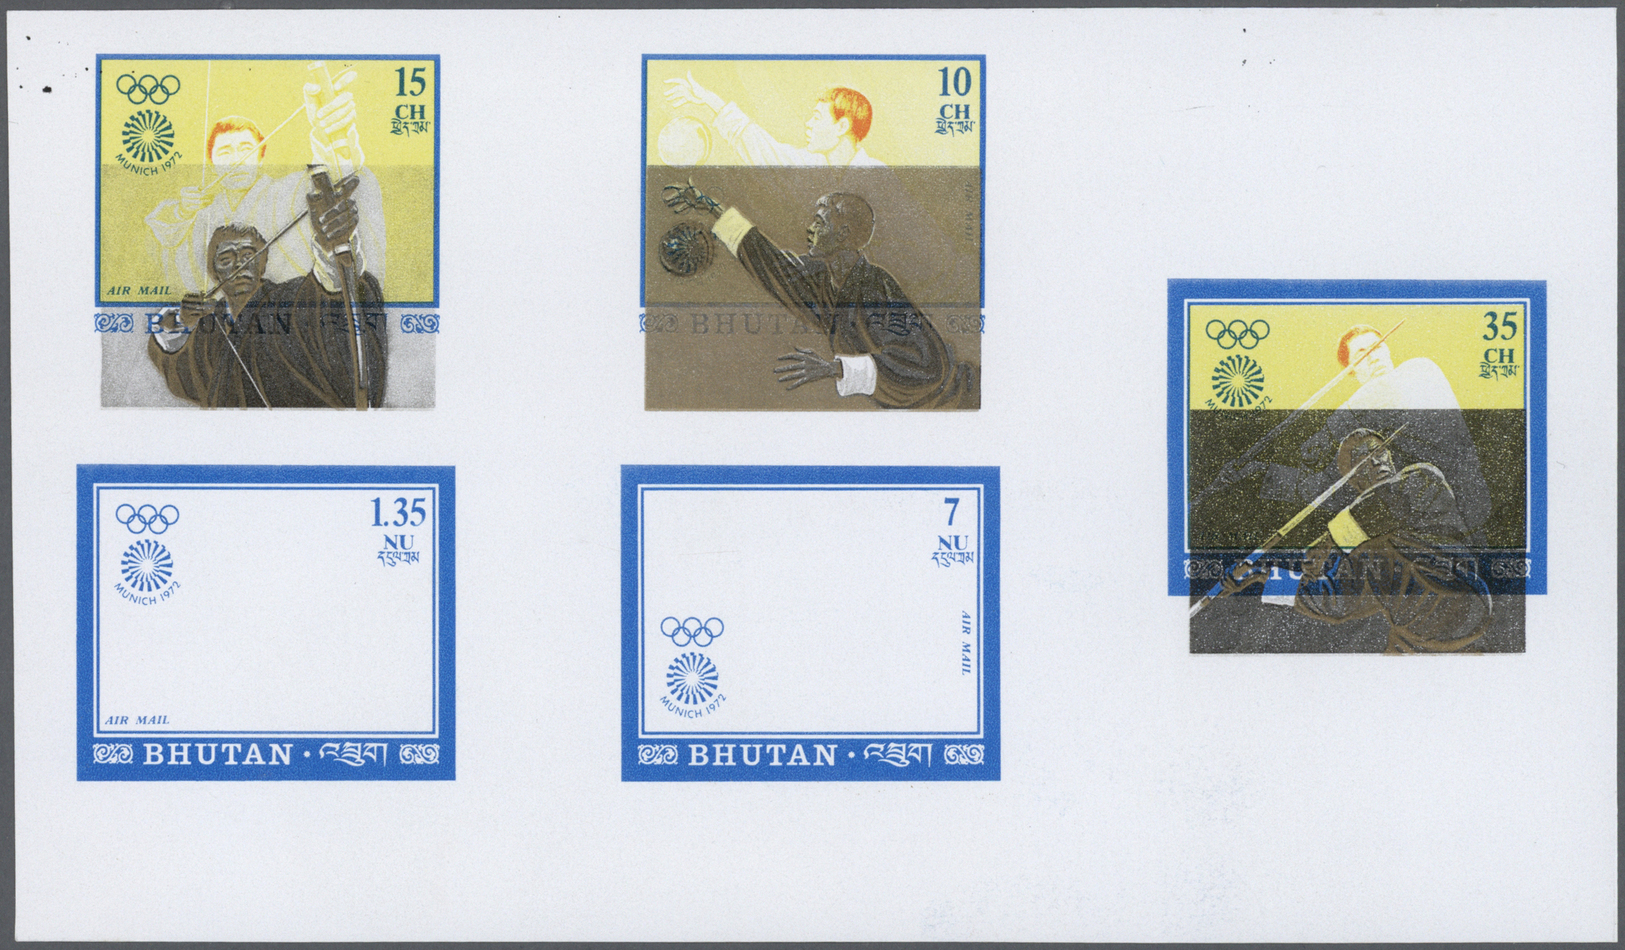 ** Thematik: Olympische Spiele / olympic games: 1972, MUNICH ´72, basketball, archery and javelin - 9 items; Bhutan, pro